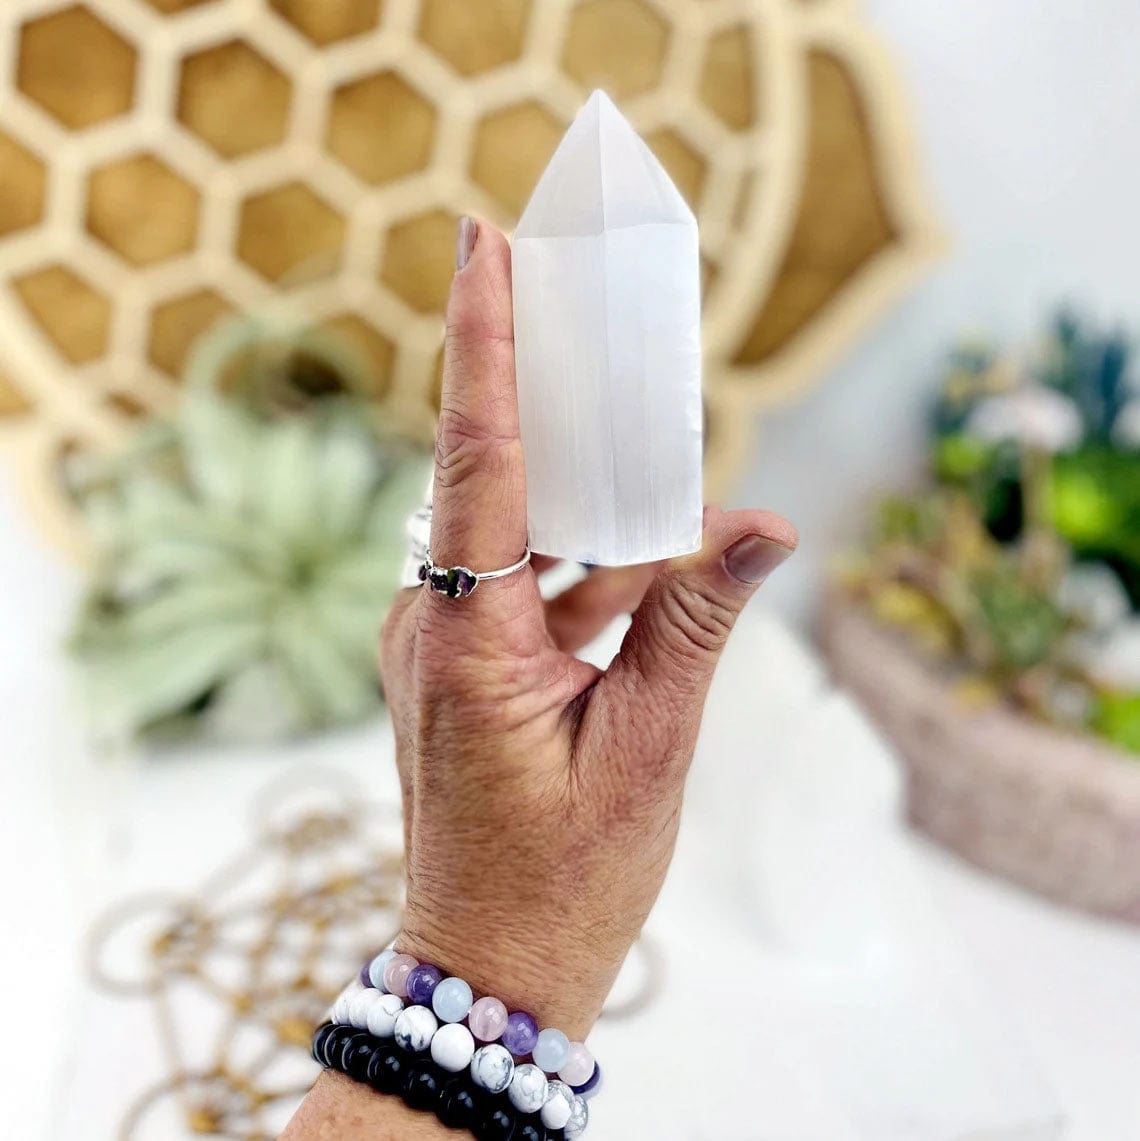 Selenite Tower Points 10CM tall in a hand for size